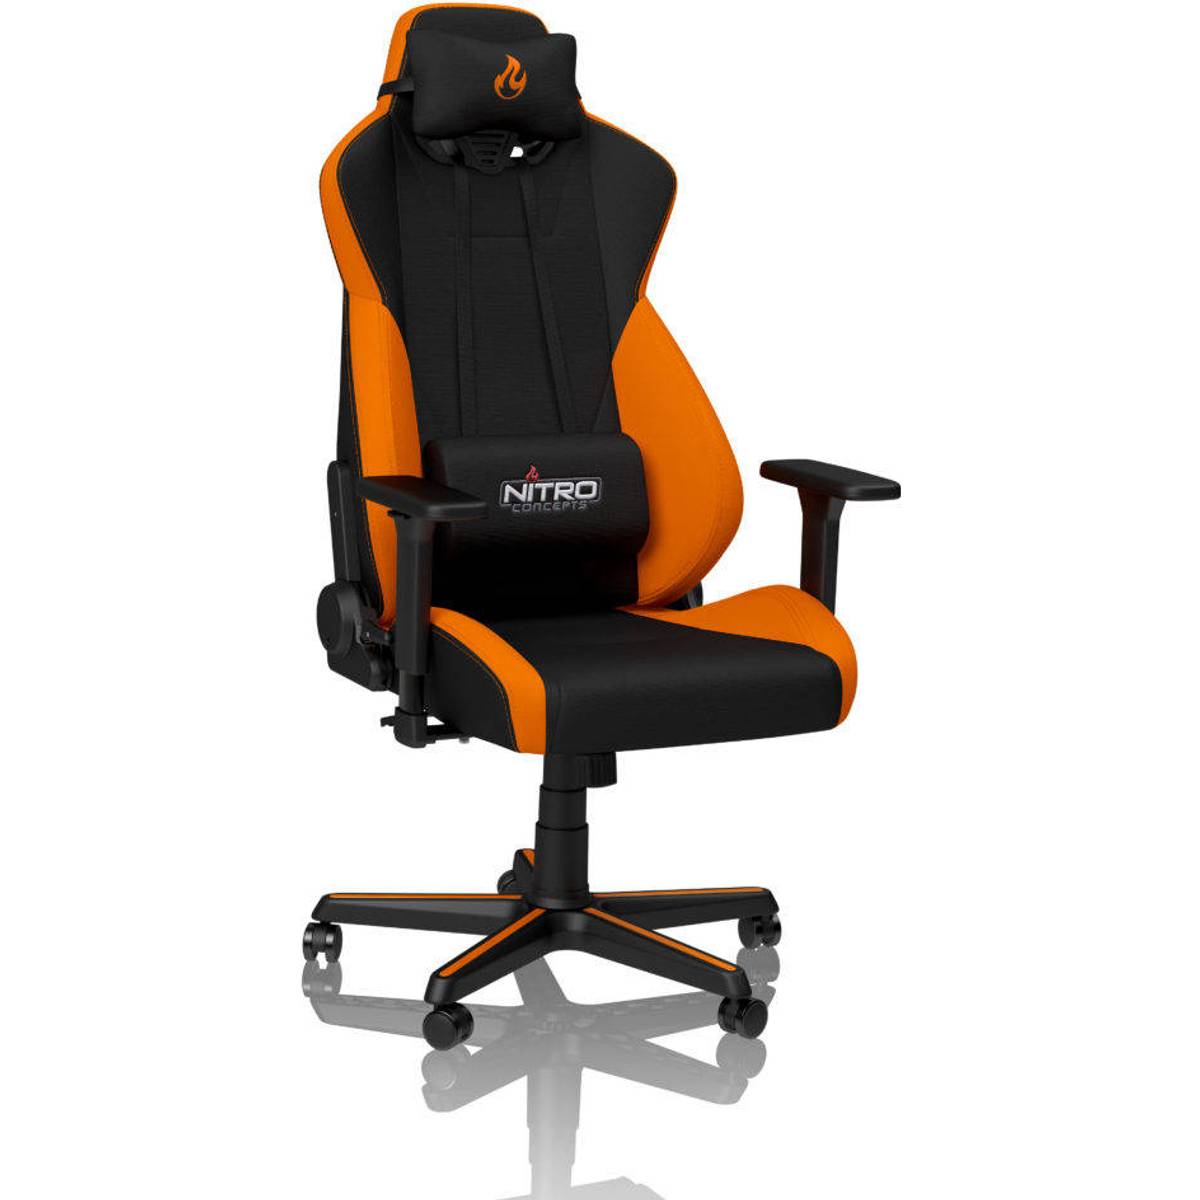  Gaming  Chairs  1000 products at PriceRunner  See the 